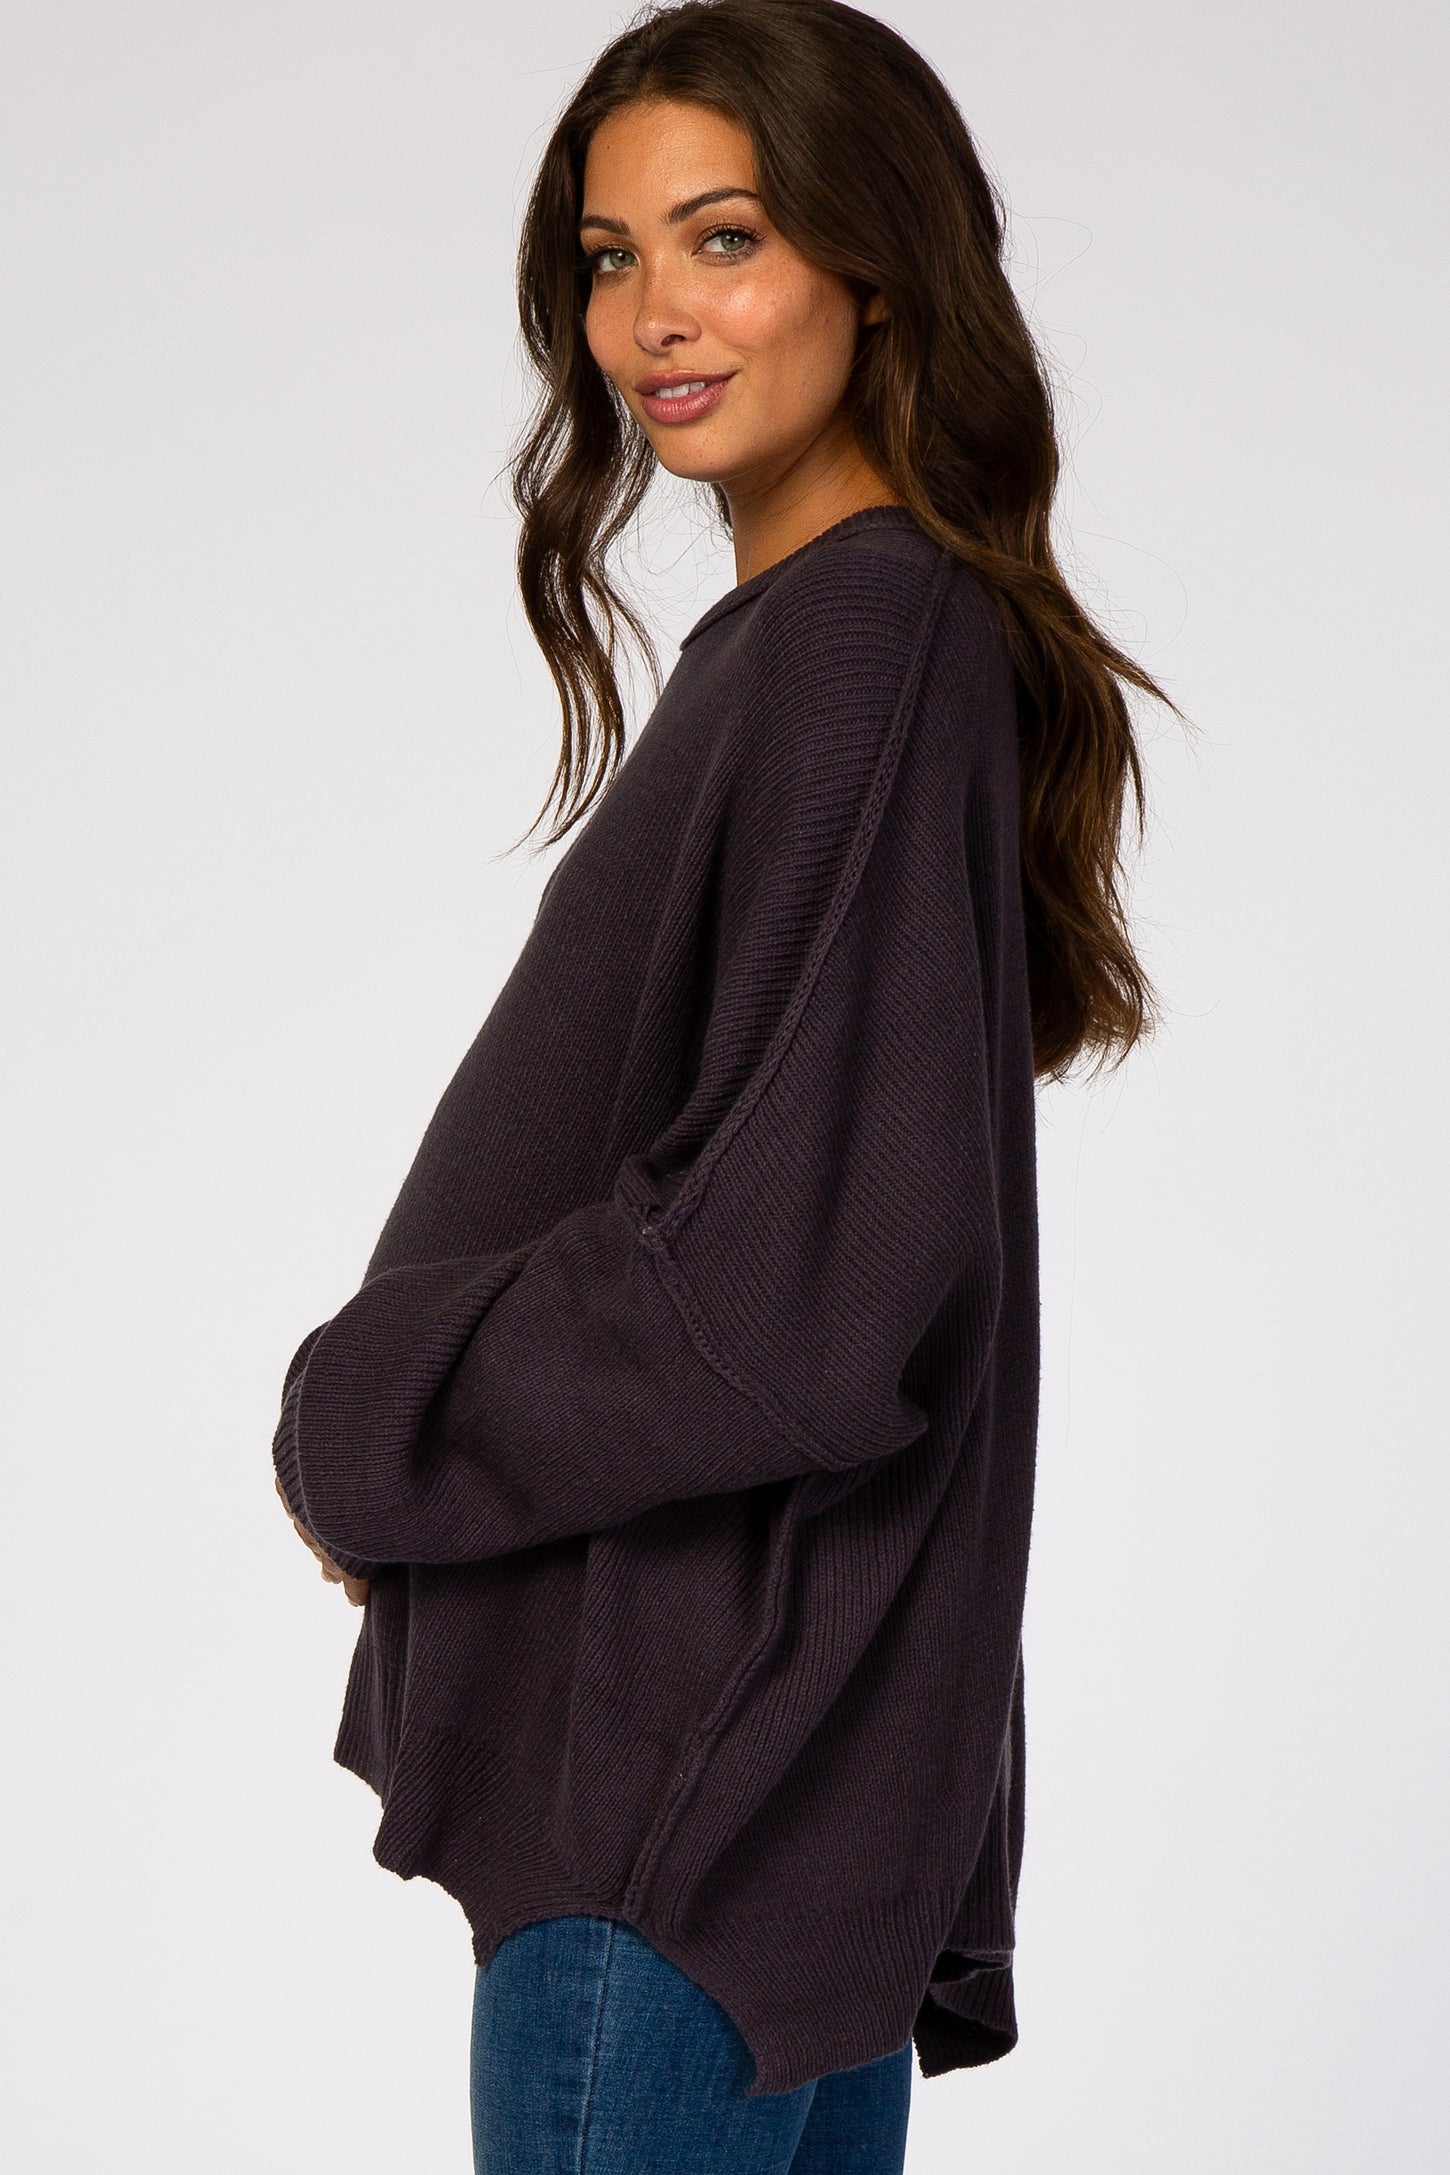 Charcoal Loose Knit Side Slit Maternity Sweater